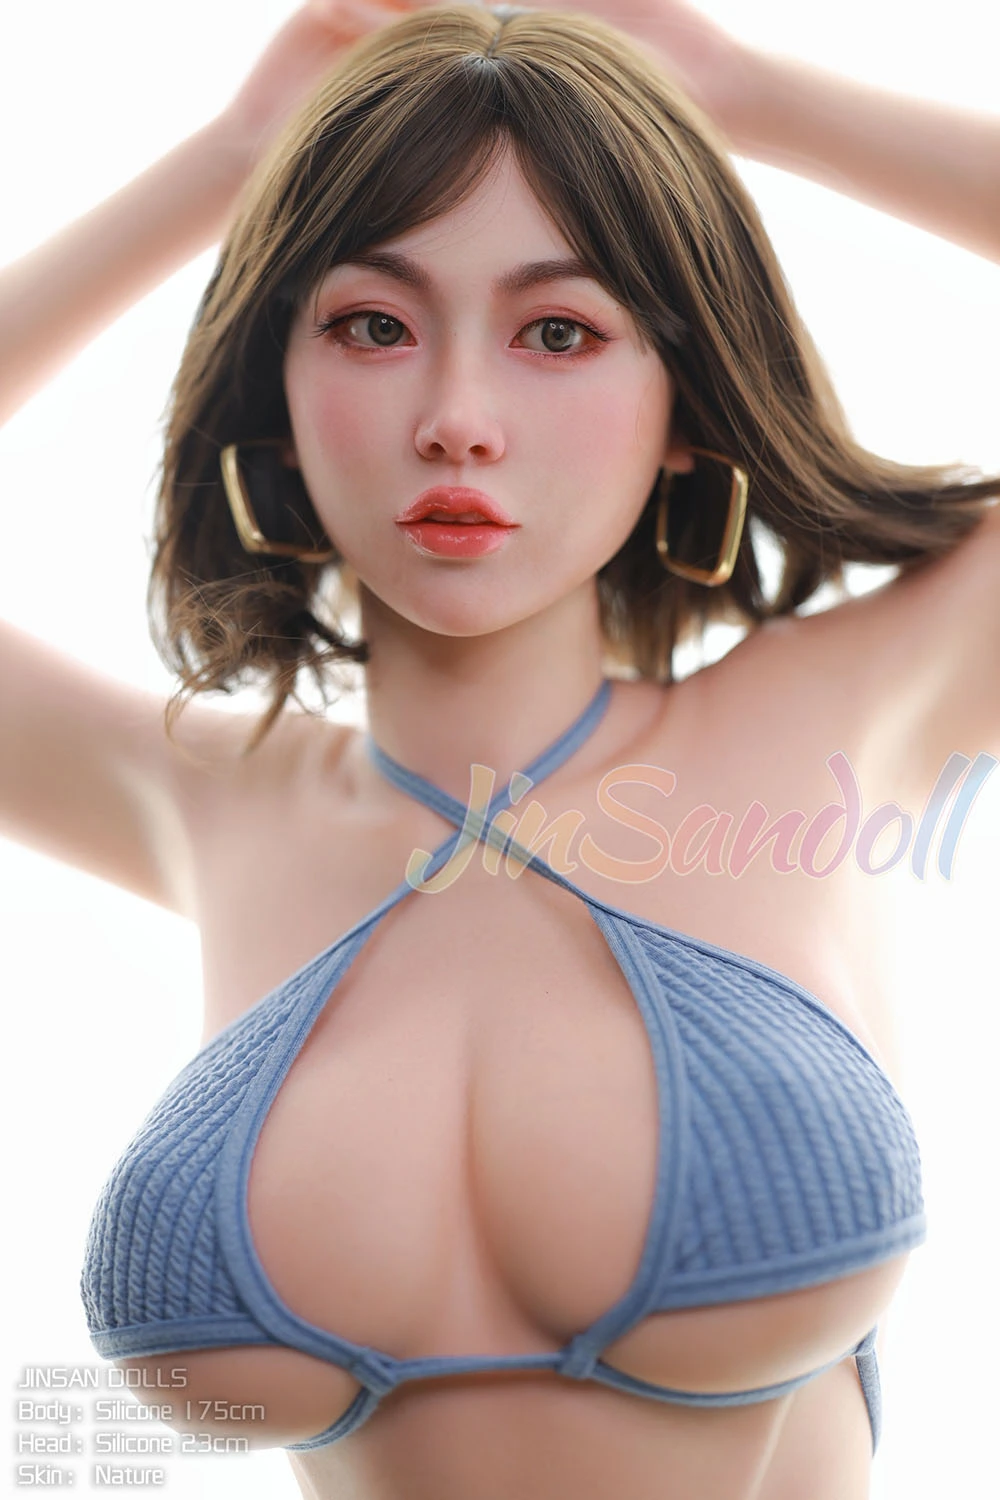 exposed sex doll